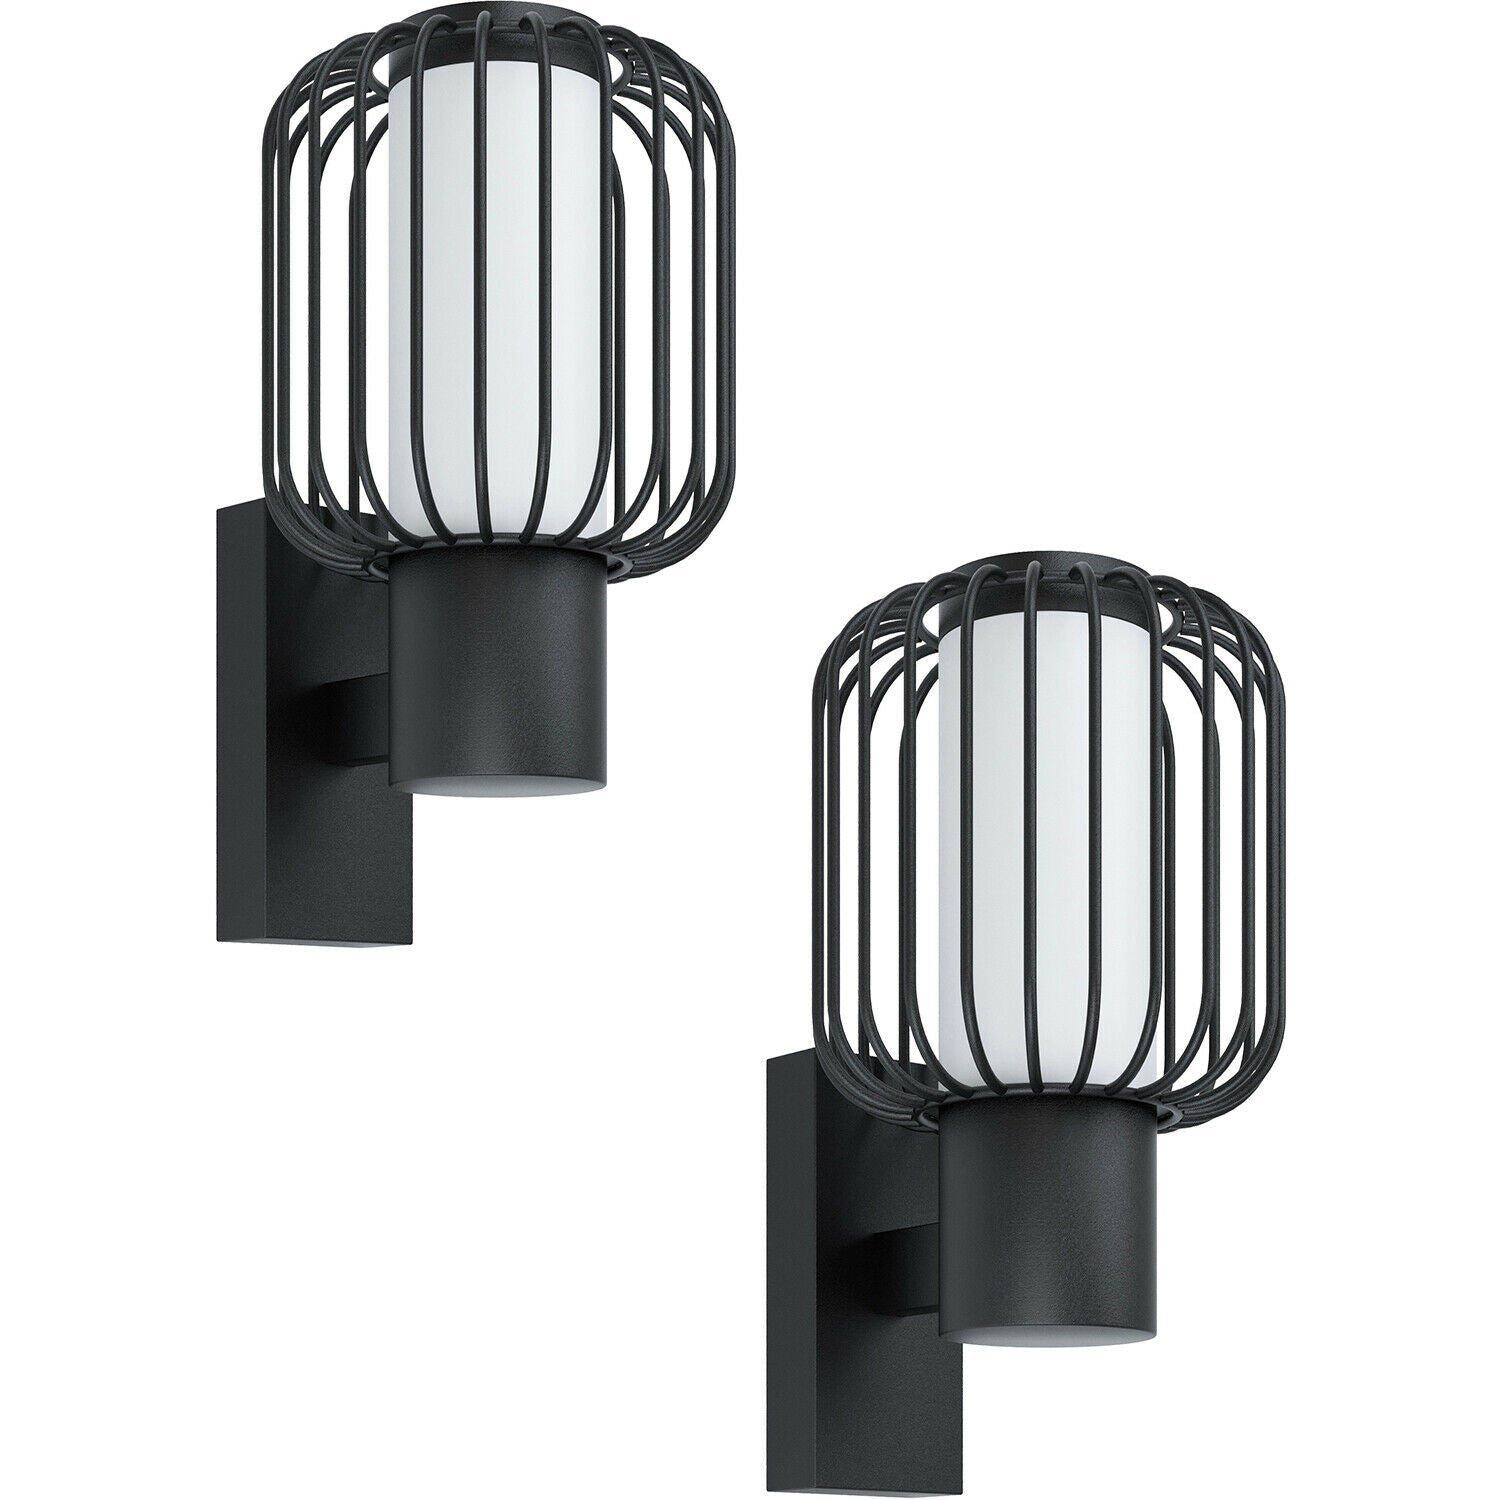 2 PACK IP44 Outdoor Wall Light Black Zinc Steel Cage 1x 28W E27 Porch Lamp